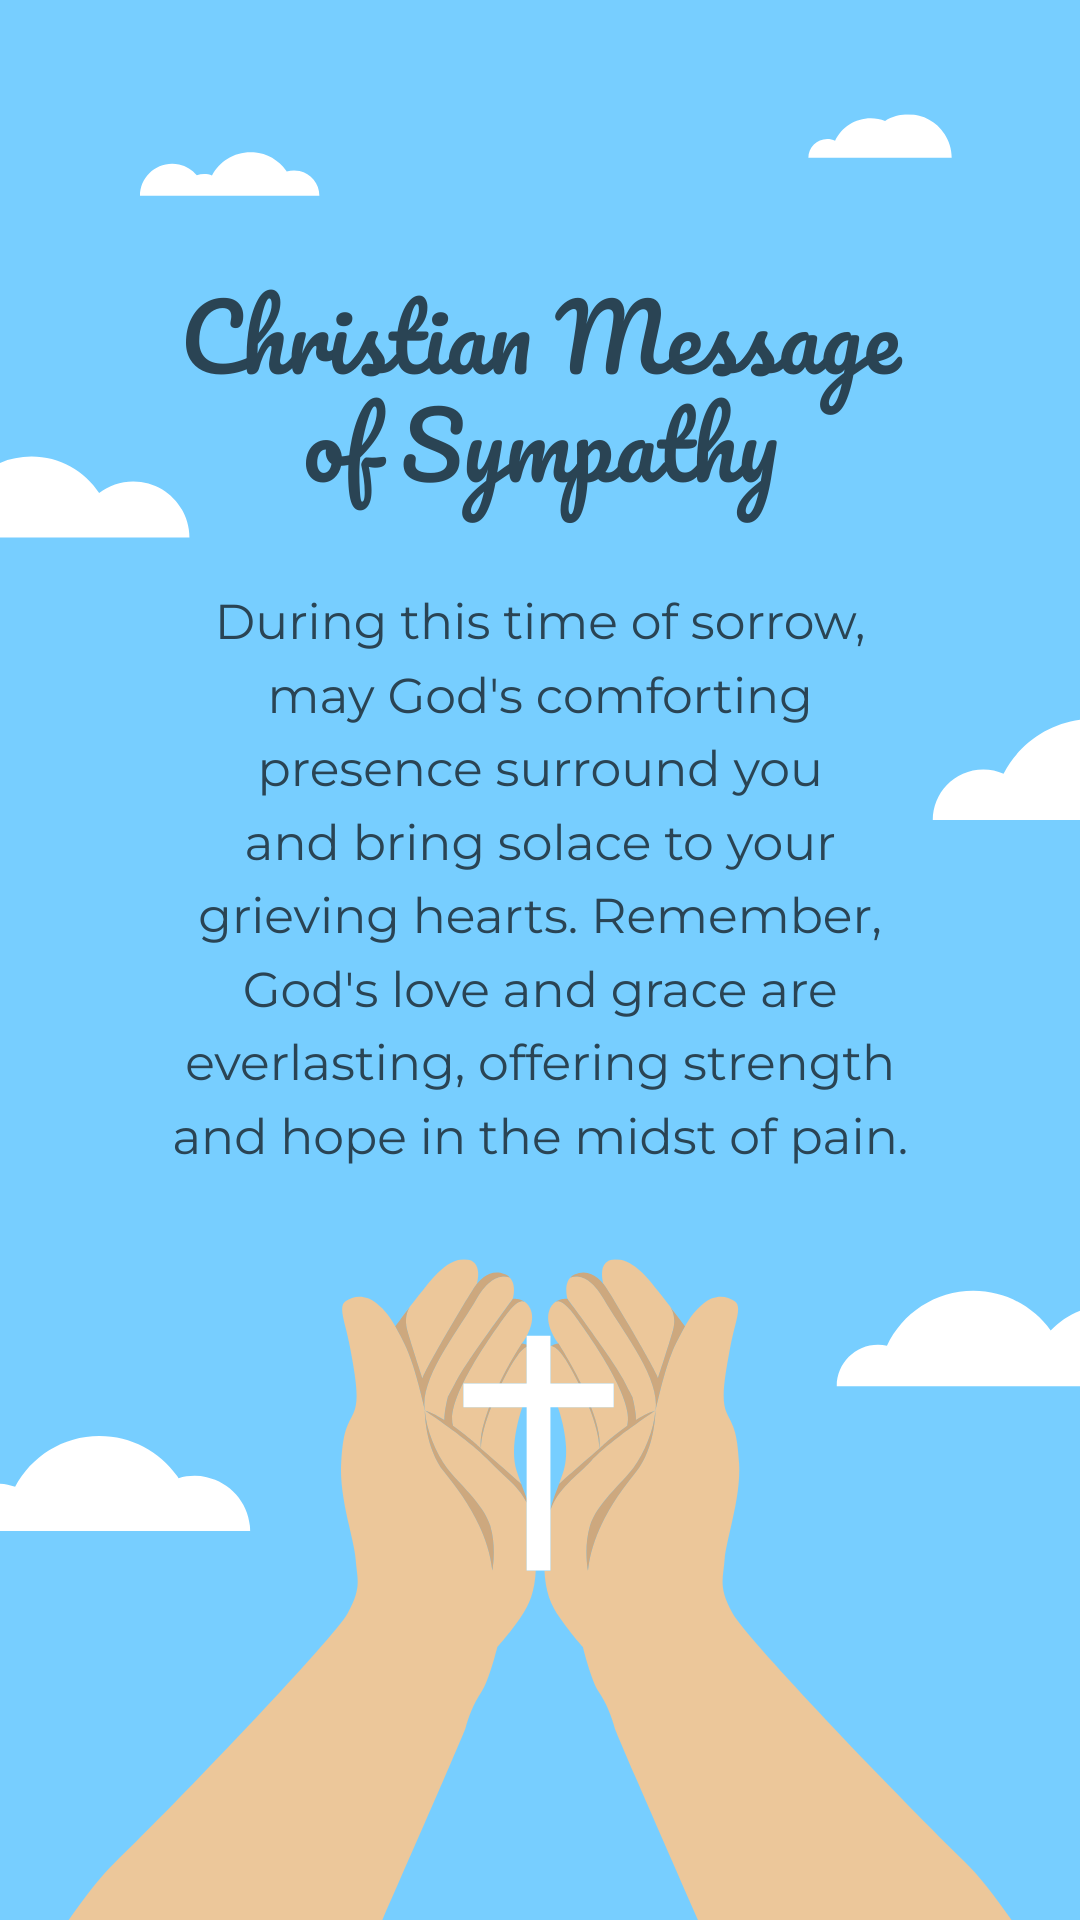 Christian Message of Sympathy